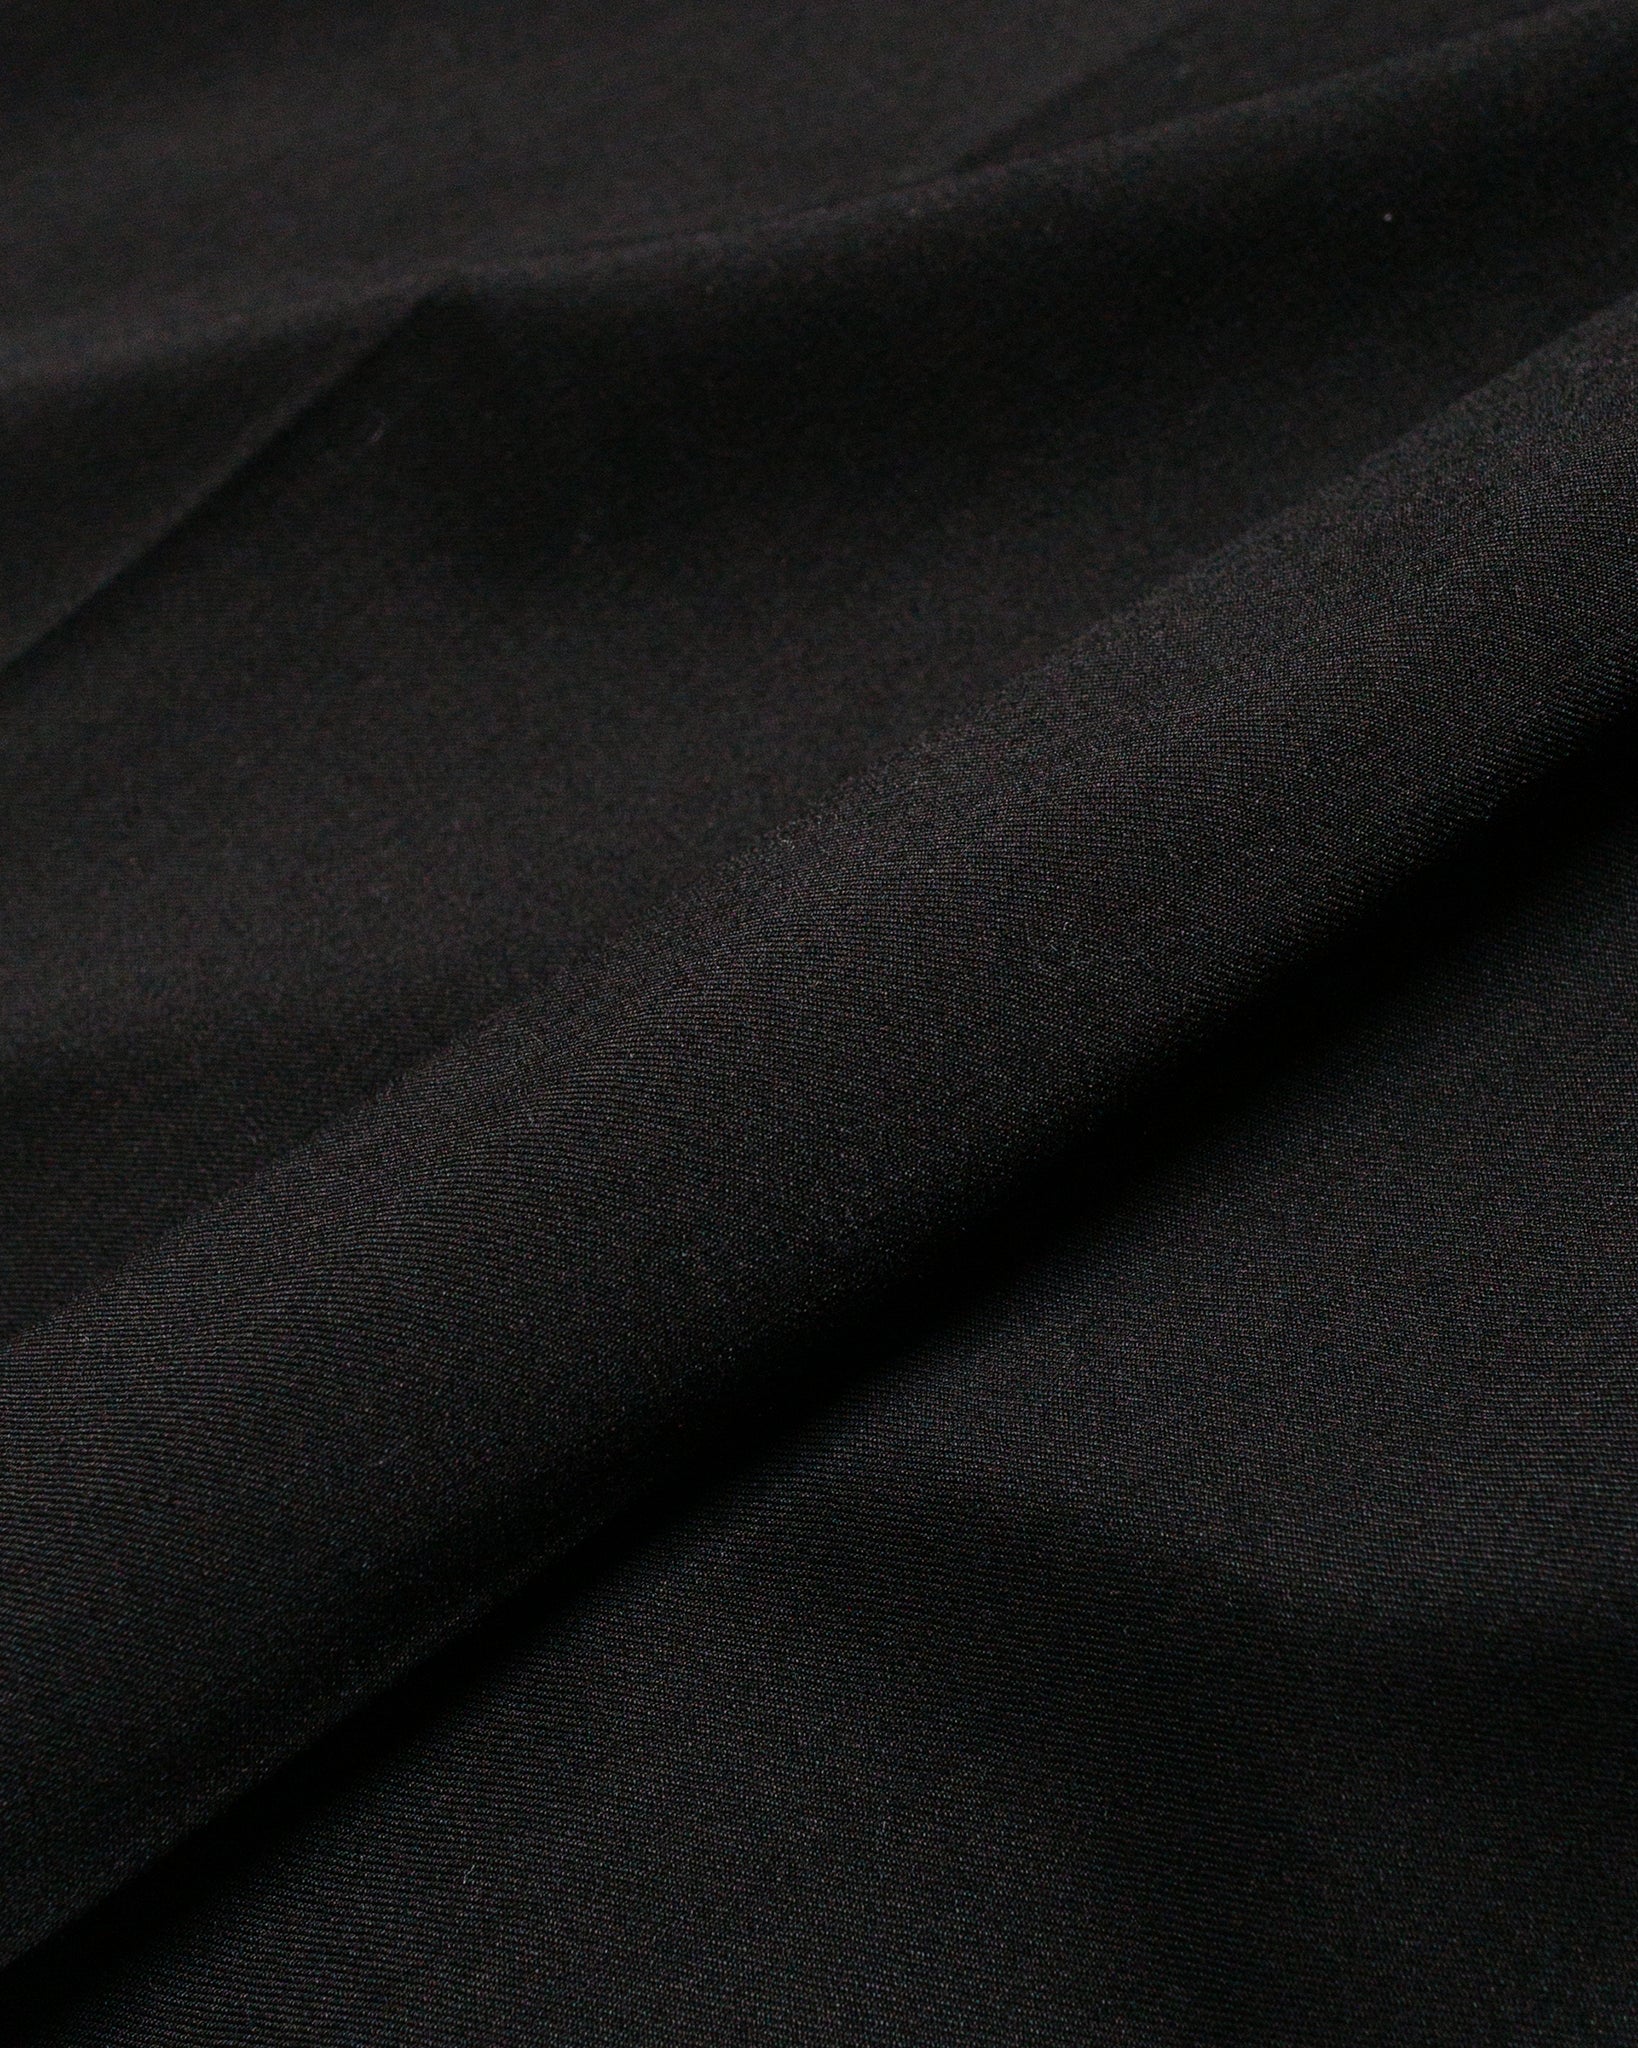 Our Legacy Chino 22 Black Worsted Wool fabric